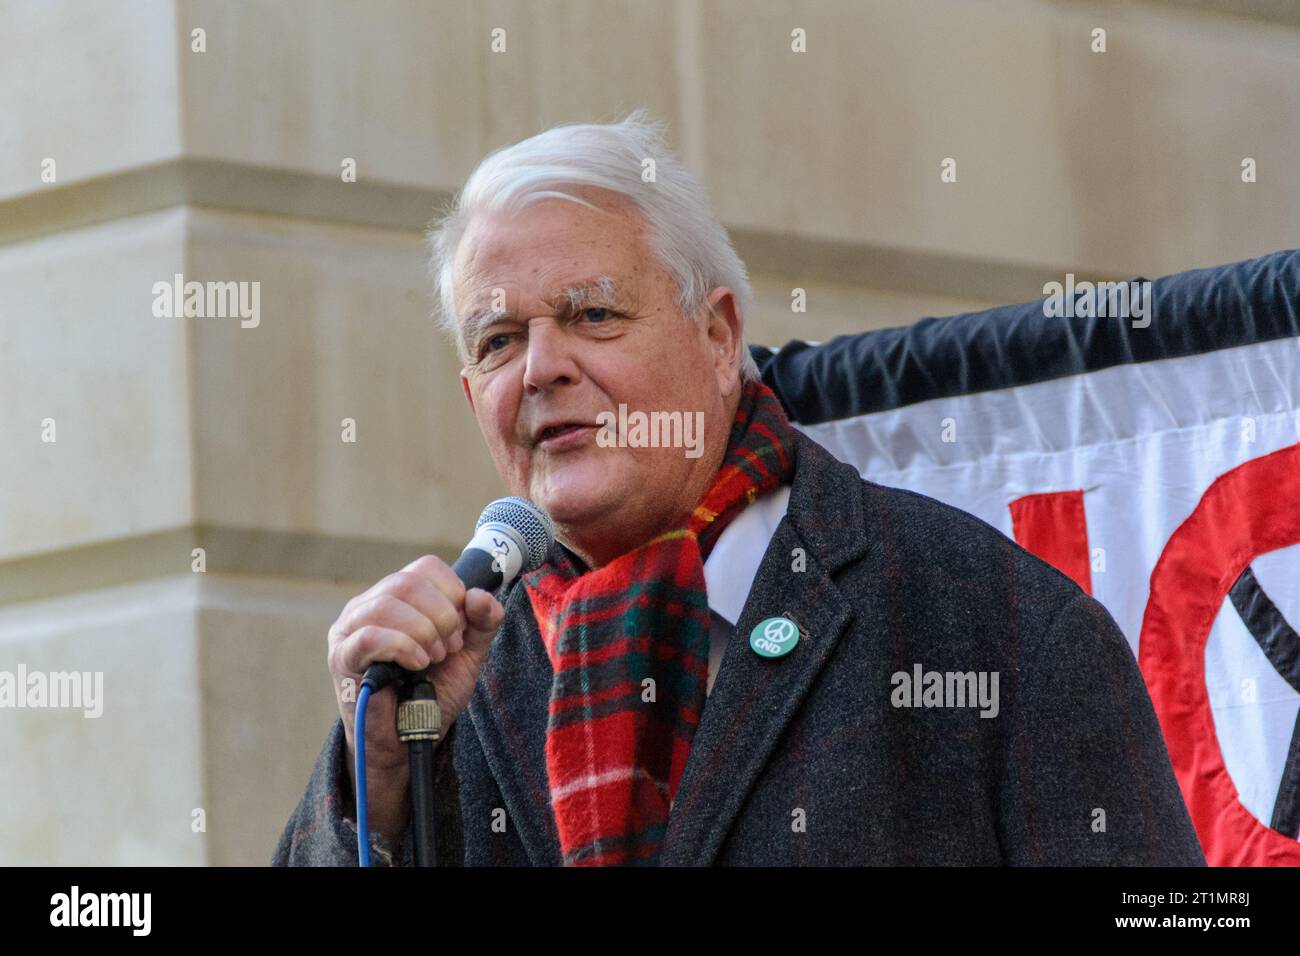 Horse Guards Avenue,, London, UK - April 2015: Bruce Kent activist and honorary vice president of CND making a speech at a Vote Out Trident event. Stock Photo